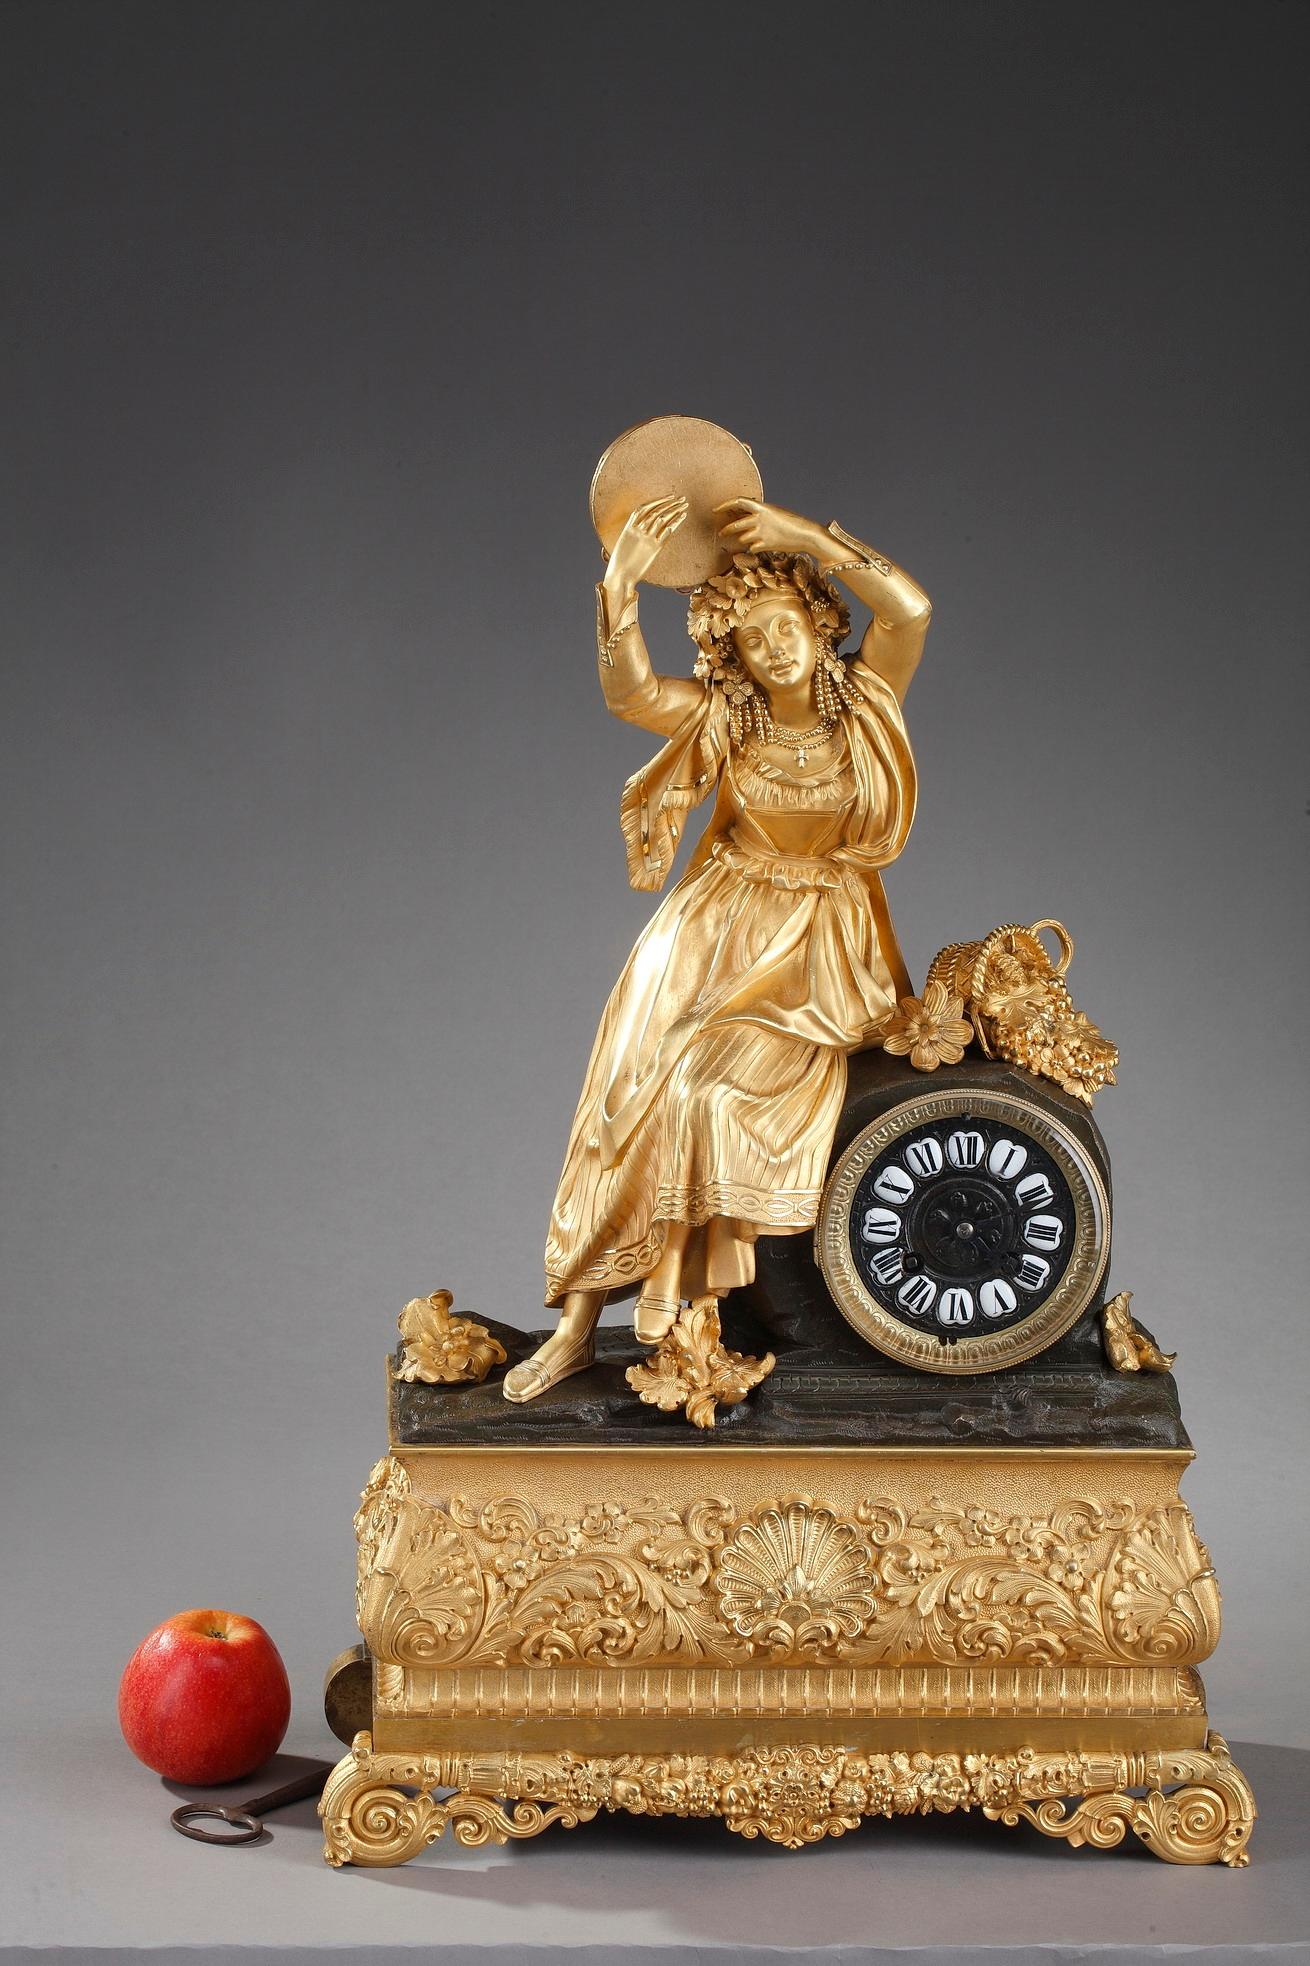 Early 19th century Louis-Philippe figural Ormolu clock featuring an oriental woman playing tambourine. She wears a crown of flowers and a rich pearl jewelry displays. The dancer is Esmeralda, a 16 years old Gypsie girl in Victor Hugo's 1831 novel